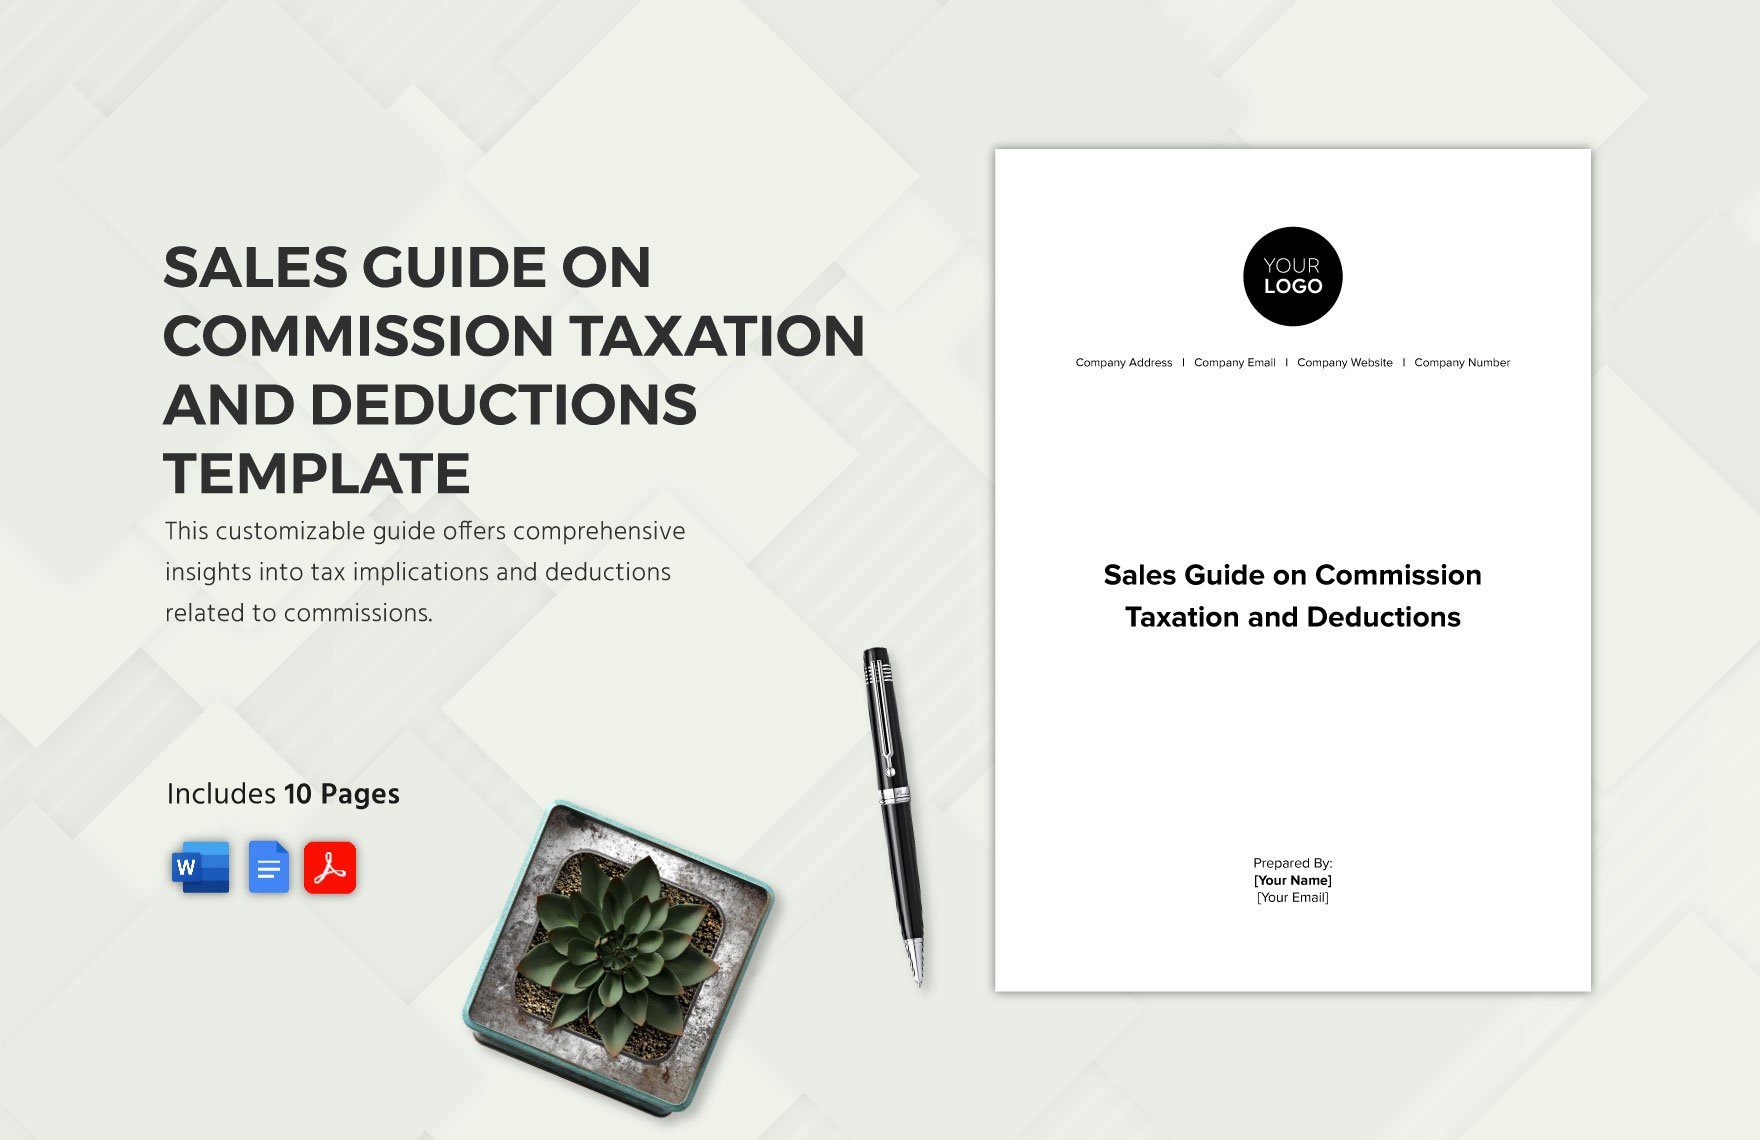 Sales Guide on Commission Taxation and Deductions Template